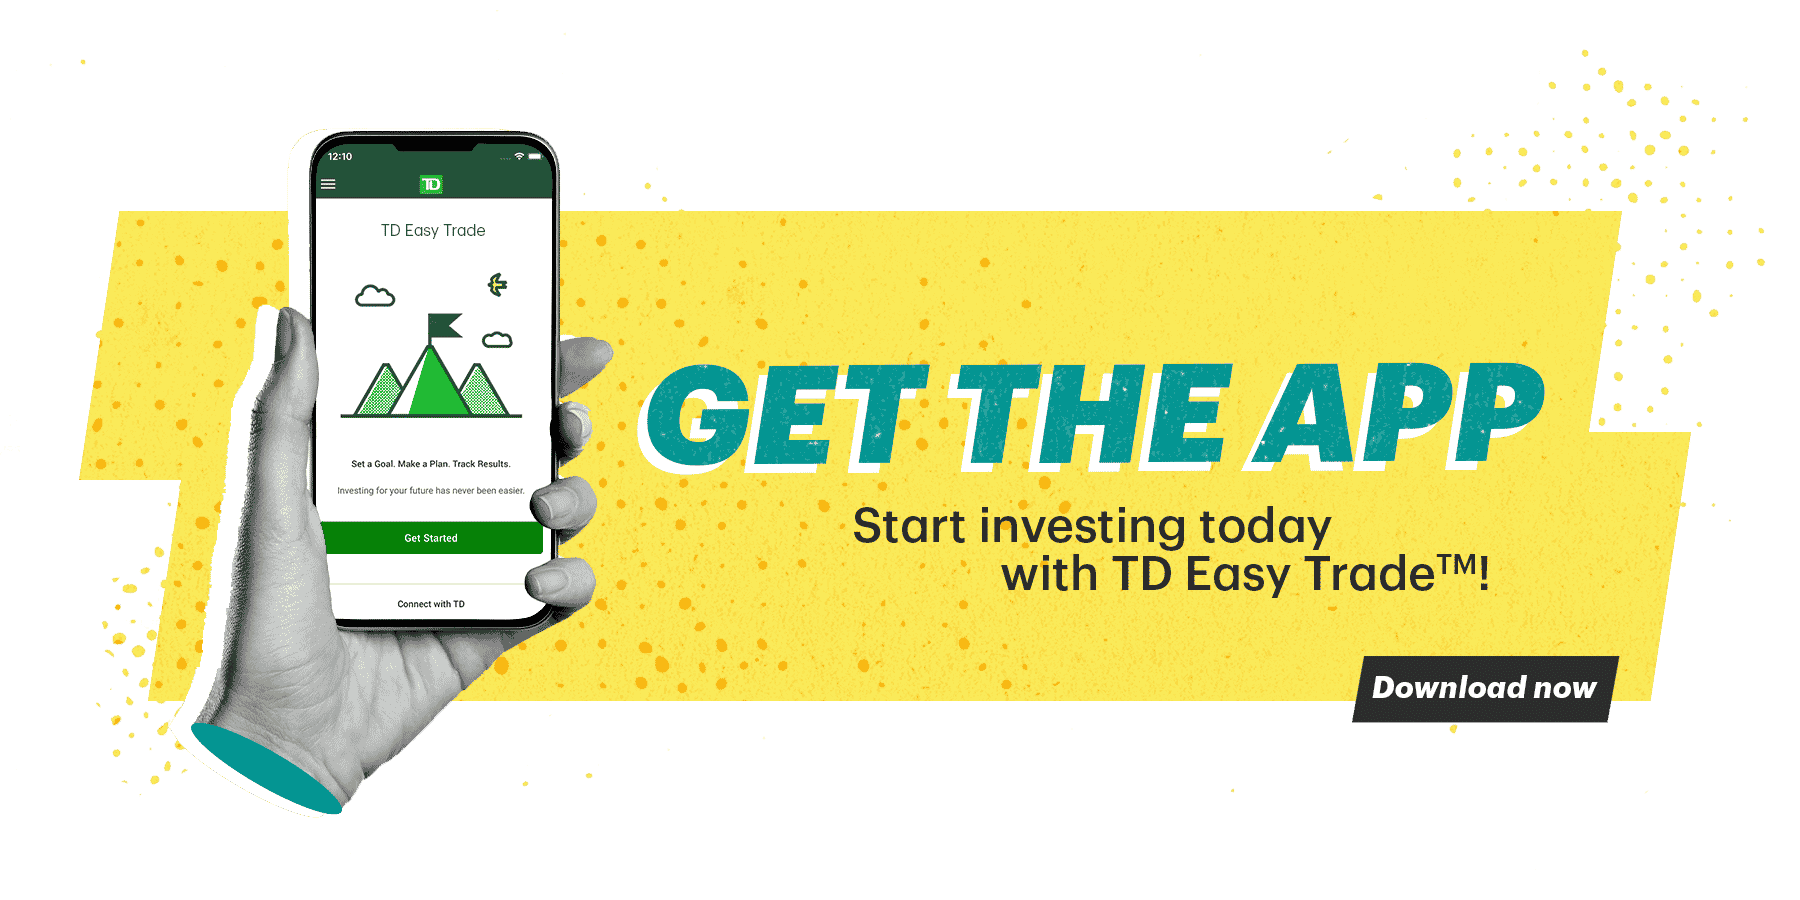 Get the App! Start investing today with TD Easy Trade! Download Now